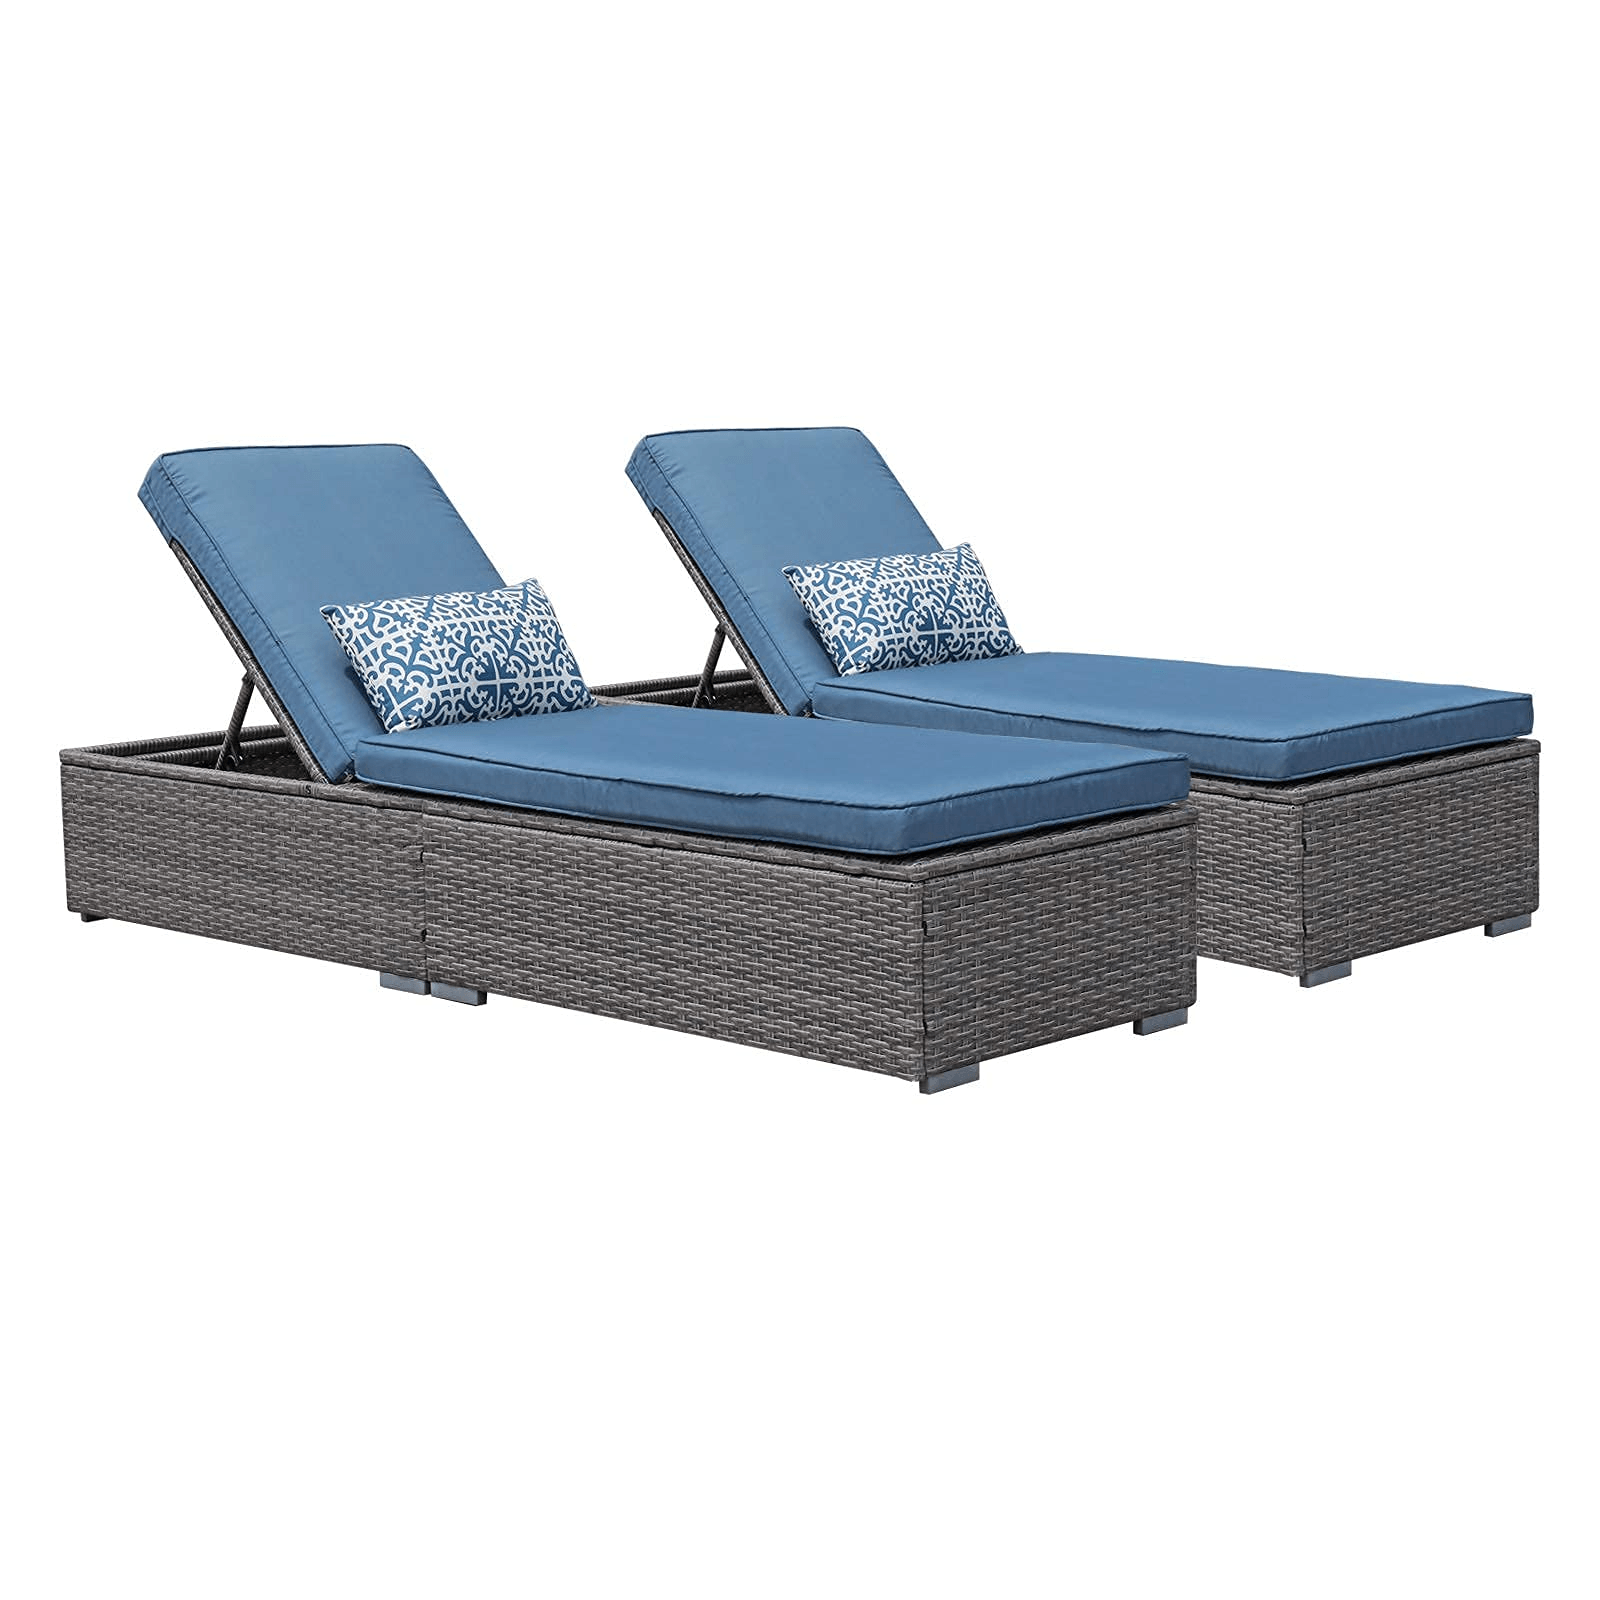 Arcadia Chaise Lounge with Aegean Blue Cushions, Set of Two - OrangeCasual